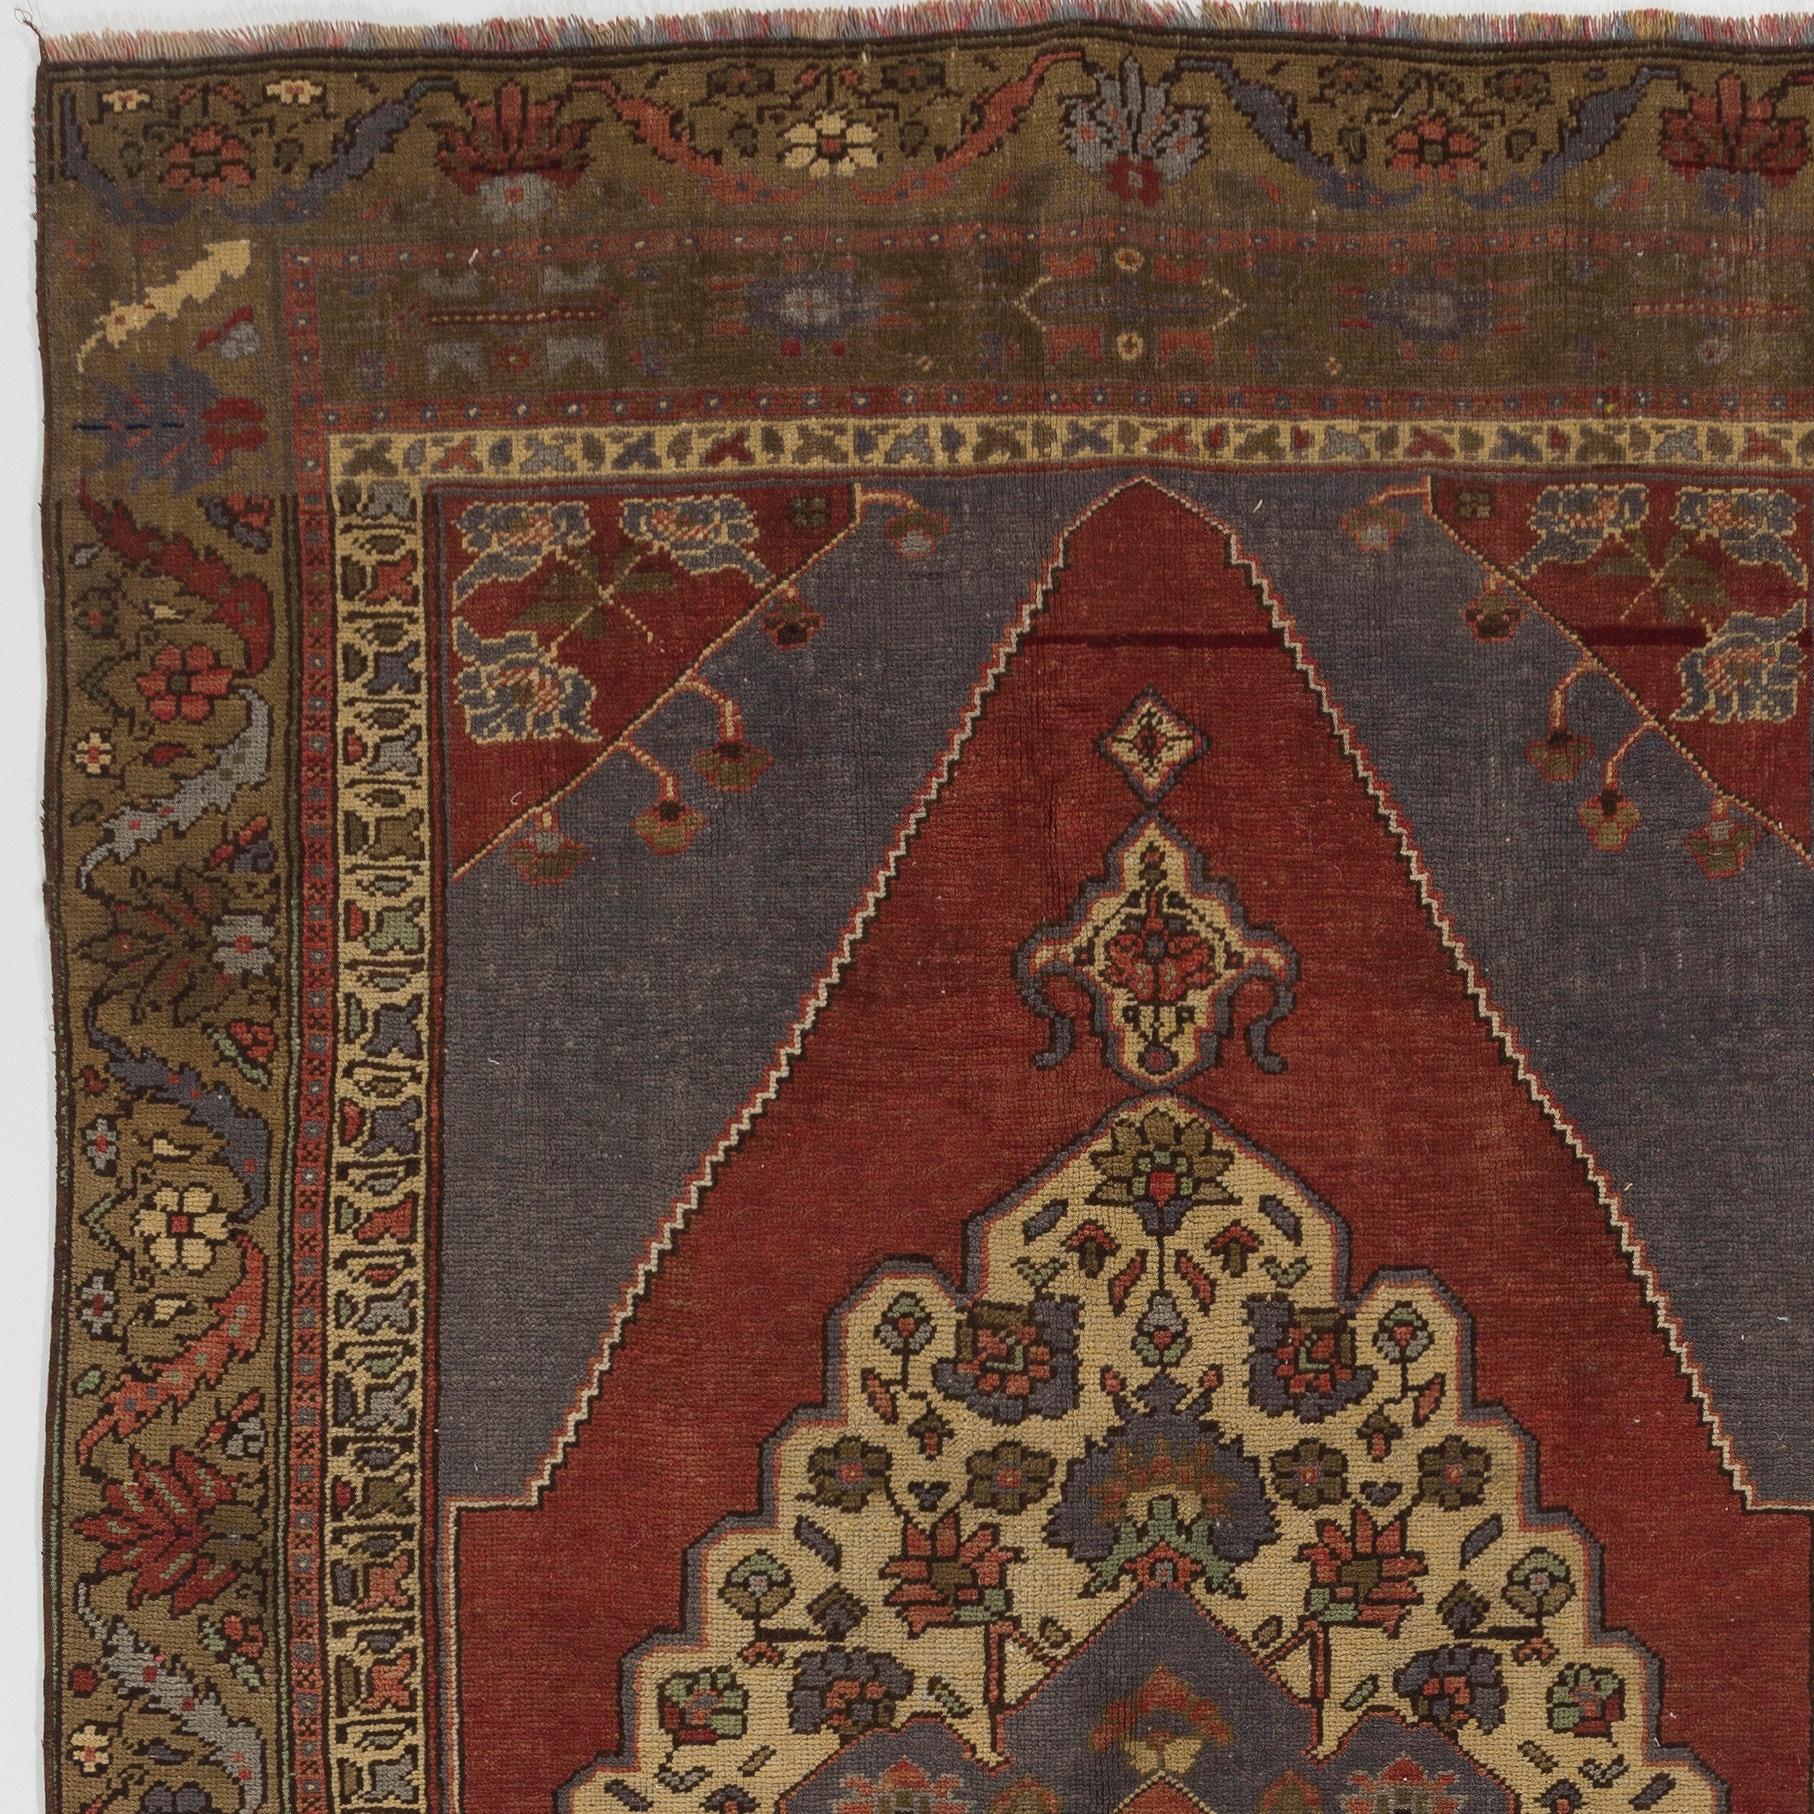 This room-size hand knotted vintage Turkish rug has at its center a prominent lozenge-shaped medallion in ivory that features scalloped edges and is decorated with free floating floral motifs around a smaller medallion in cerulean blue. The